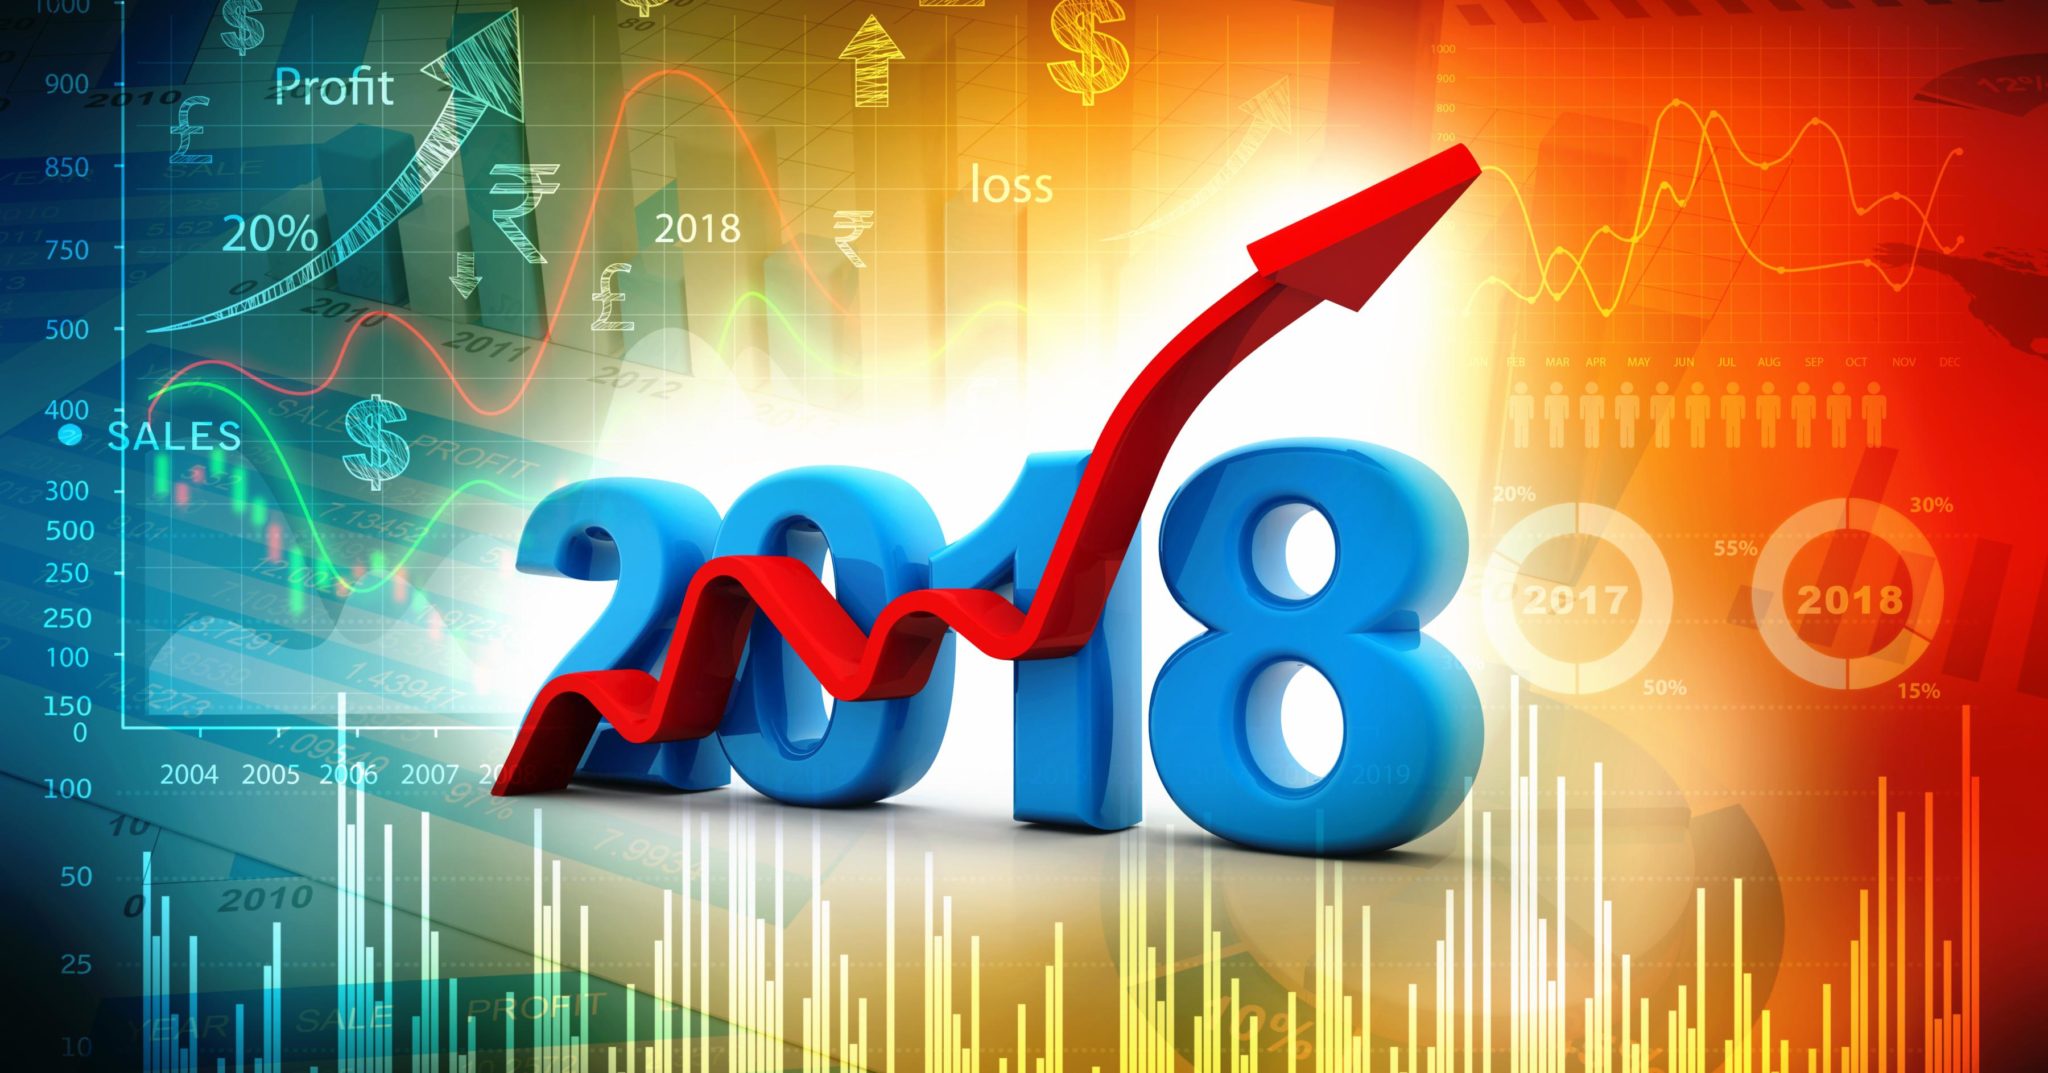 Numbers depicting the year 2018 with an upward arrow overlaid that represents business growth strategies